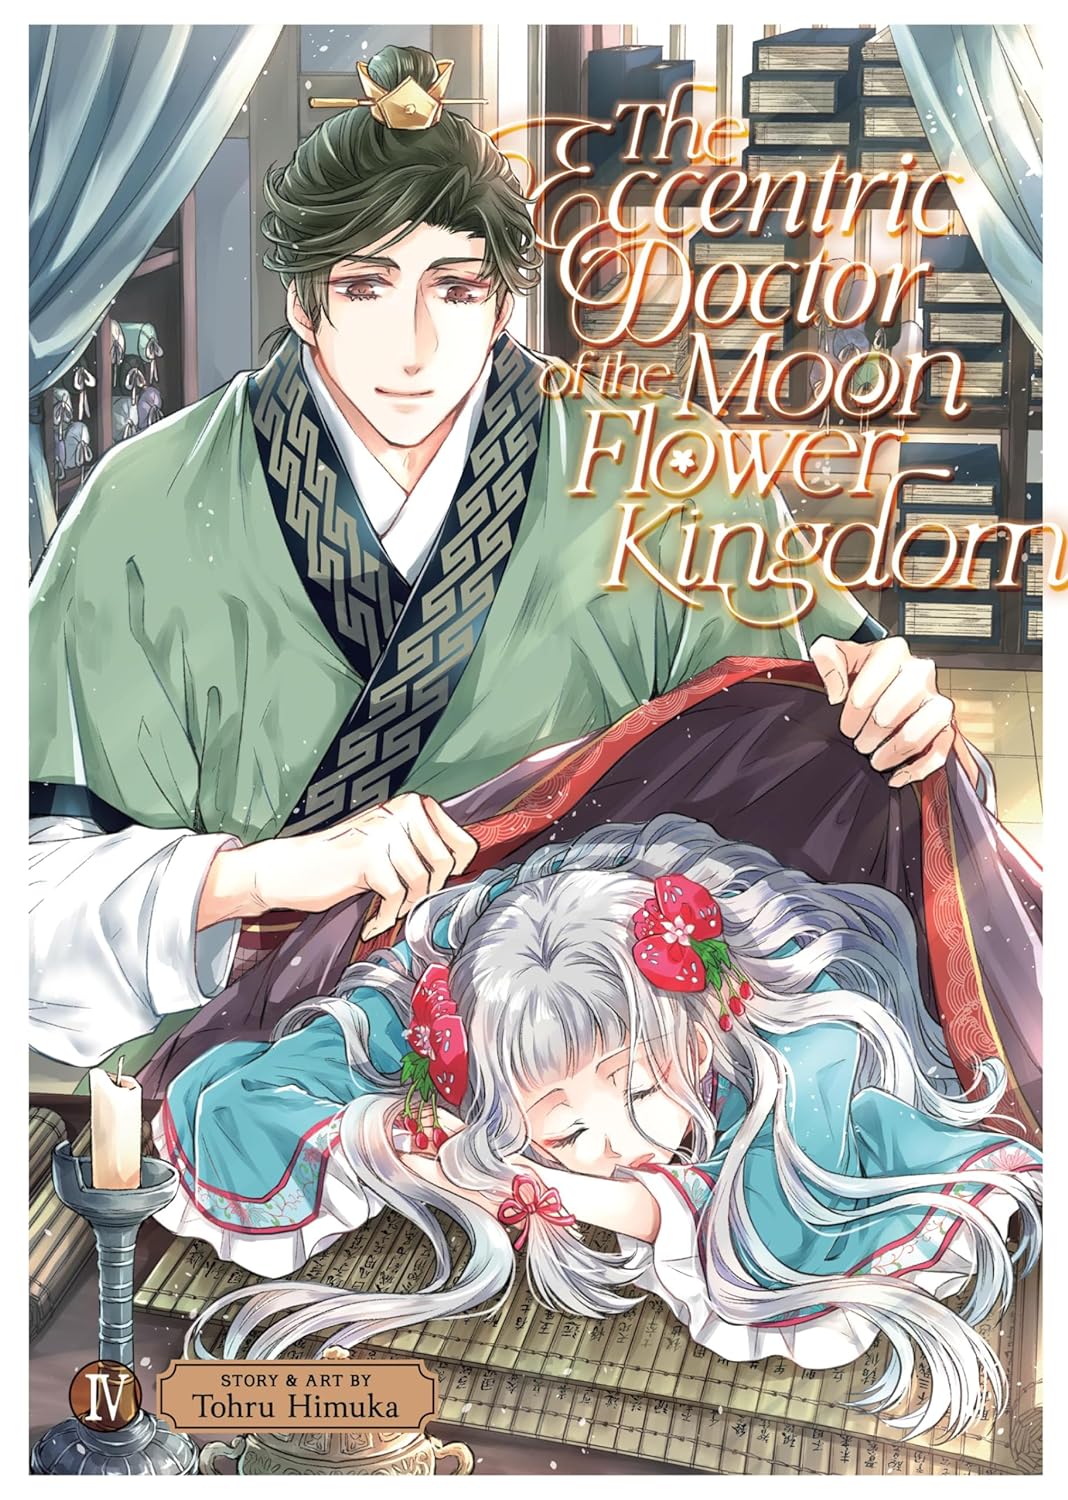 The Eccentric Doctor of the Moon Flower Kingdom Vol. 04